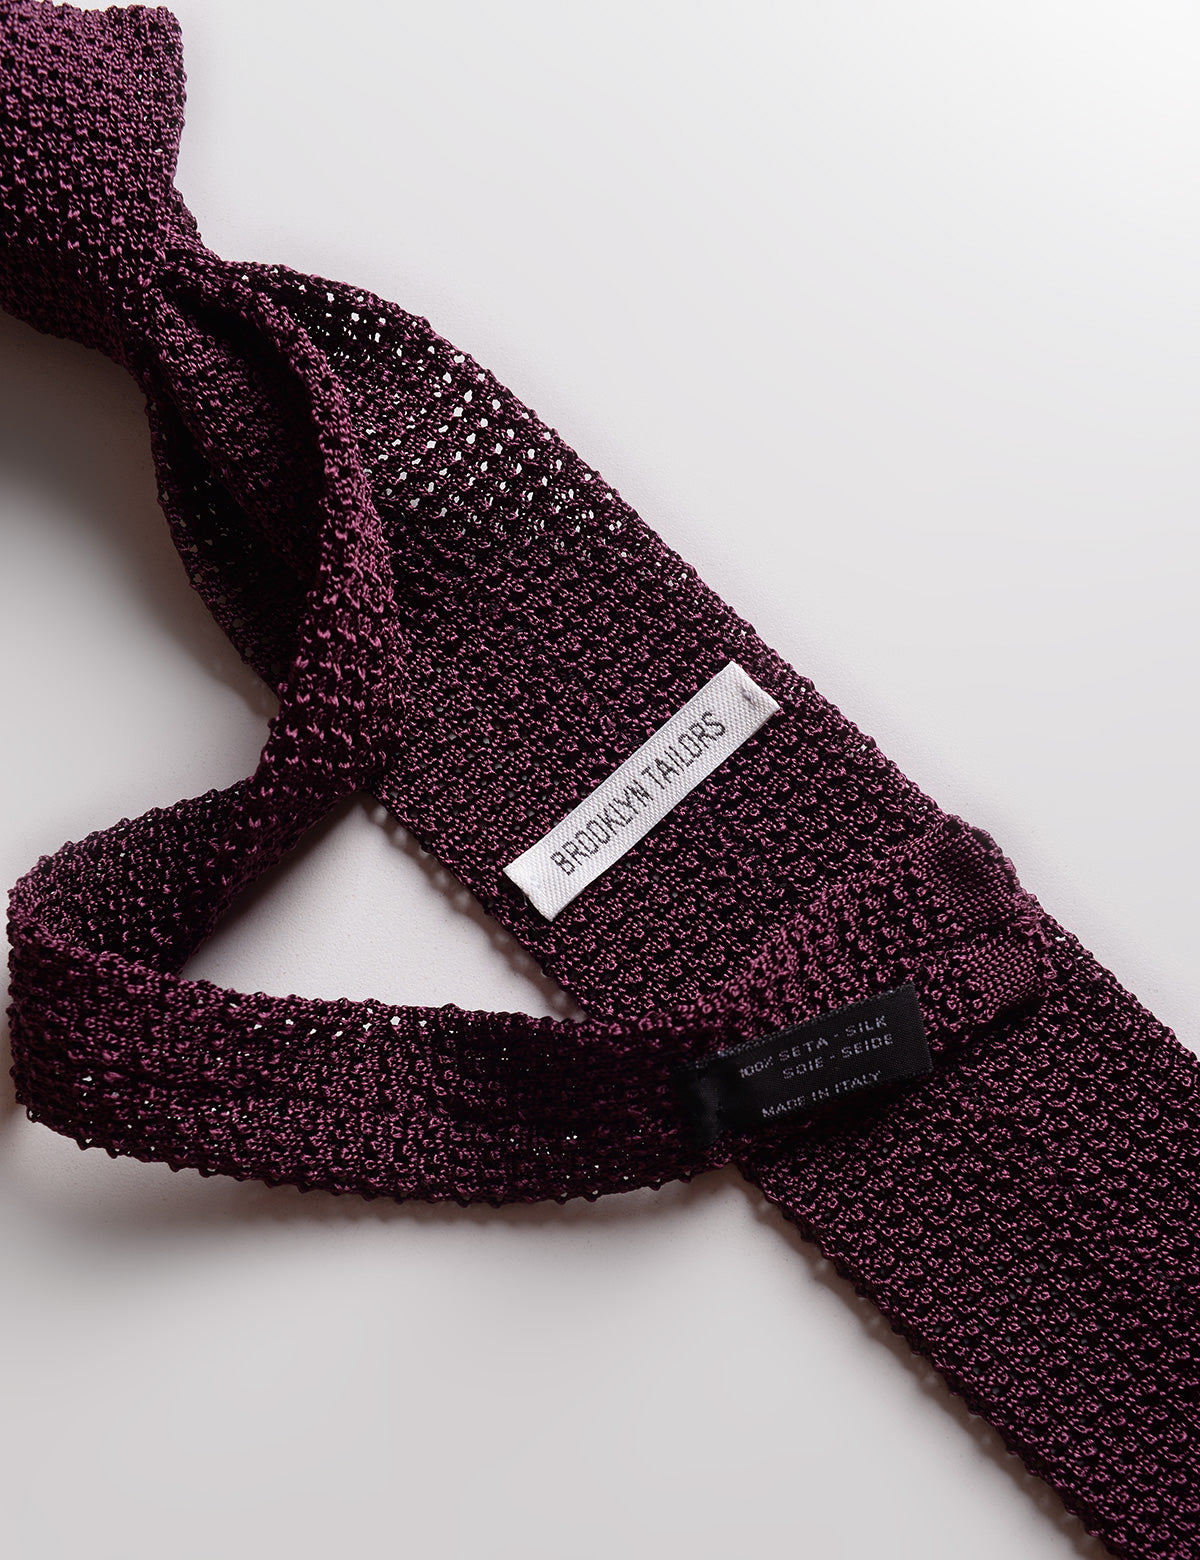 Detail of labels and knit of Italian Silk Knit Tie  - Mulberry